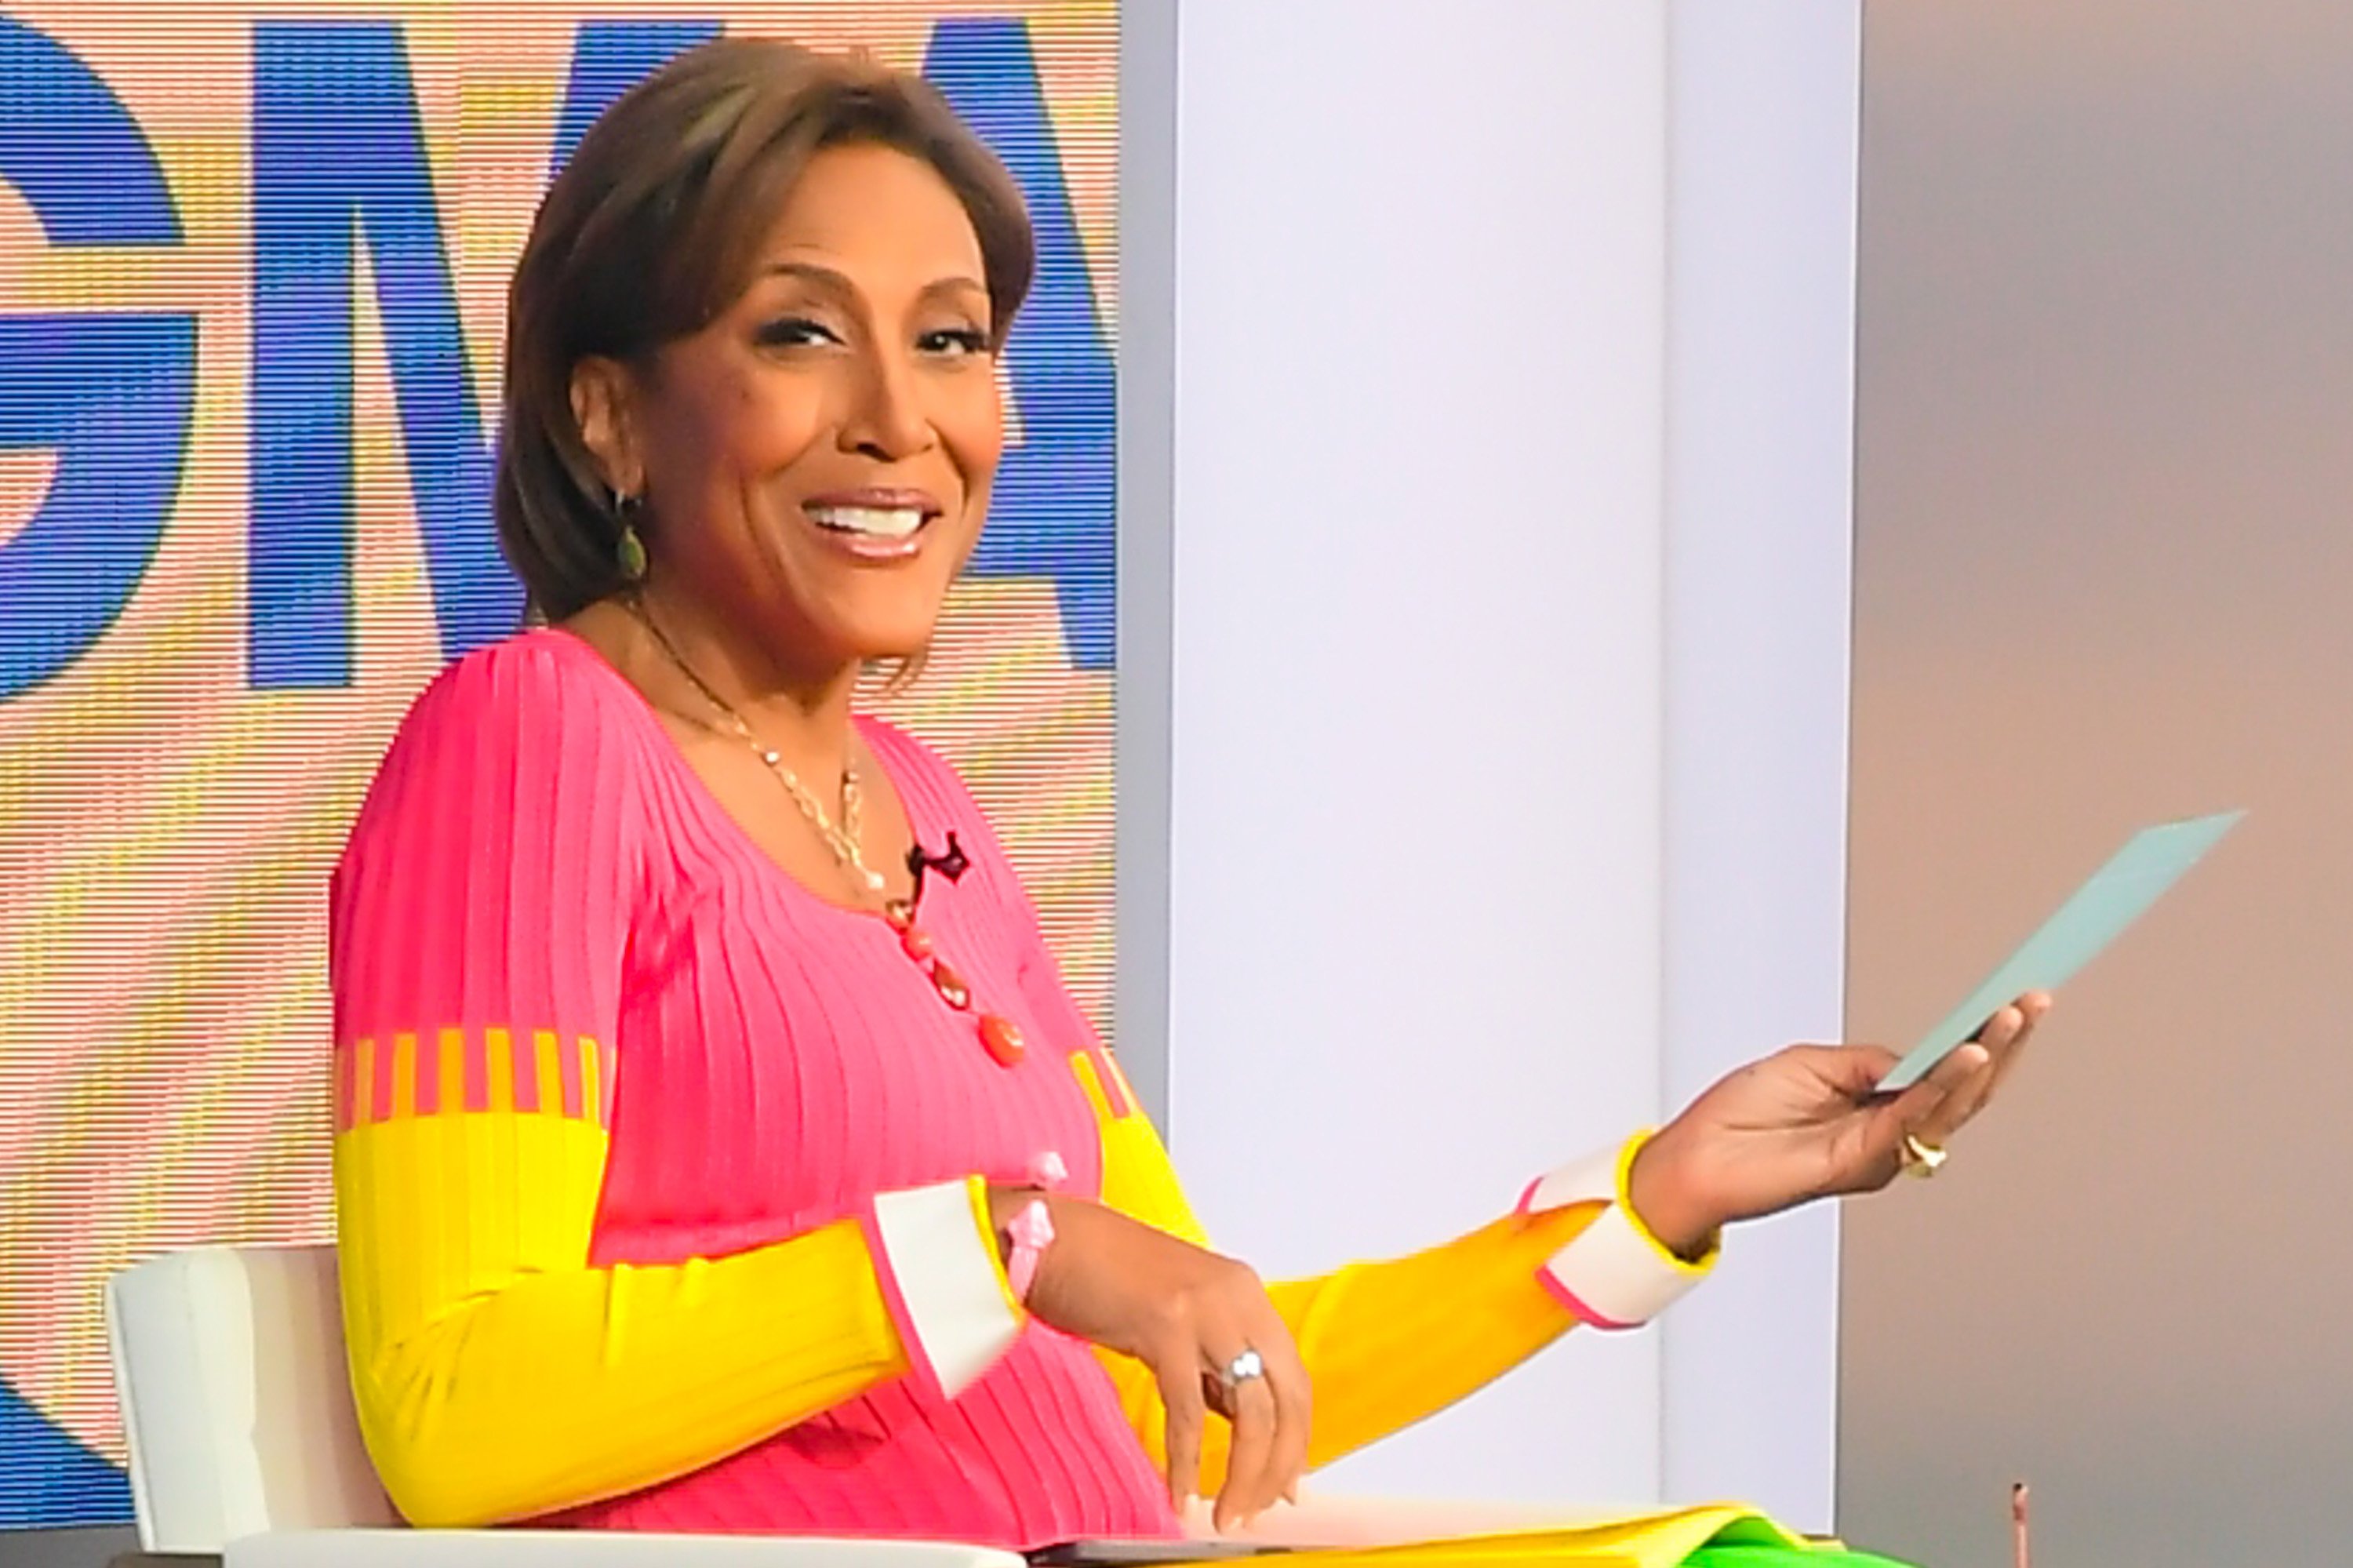 Robin Roberts, who owns a few luxury houses, sitting down on the set of 'Good Morning America'